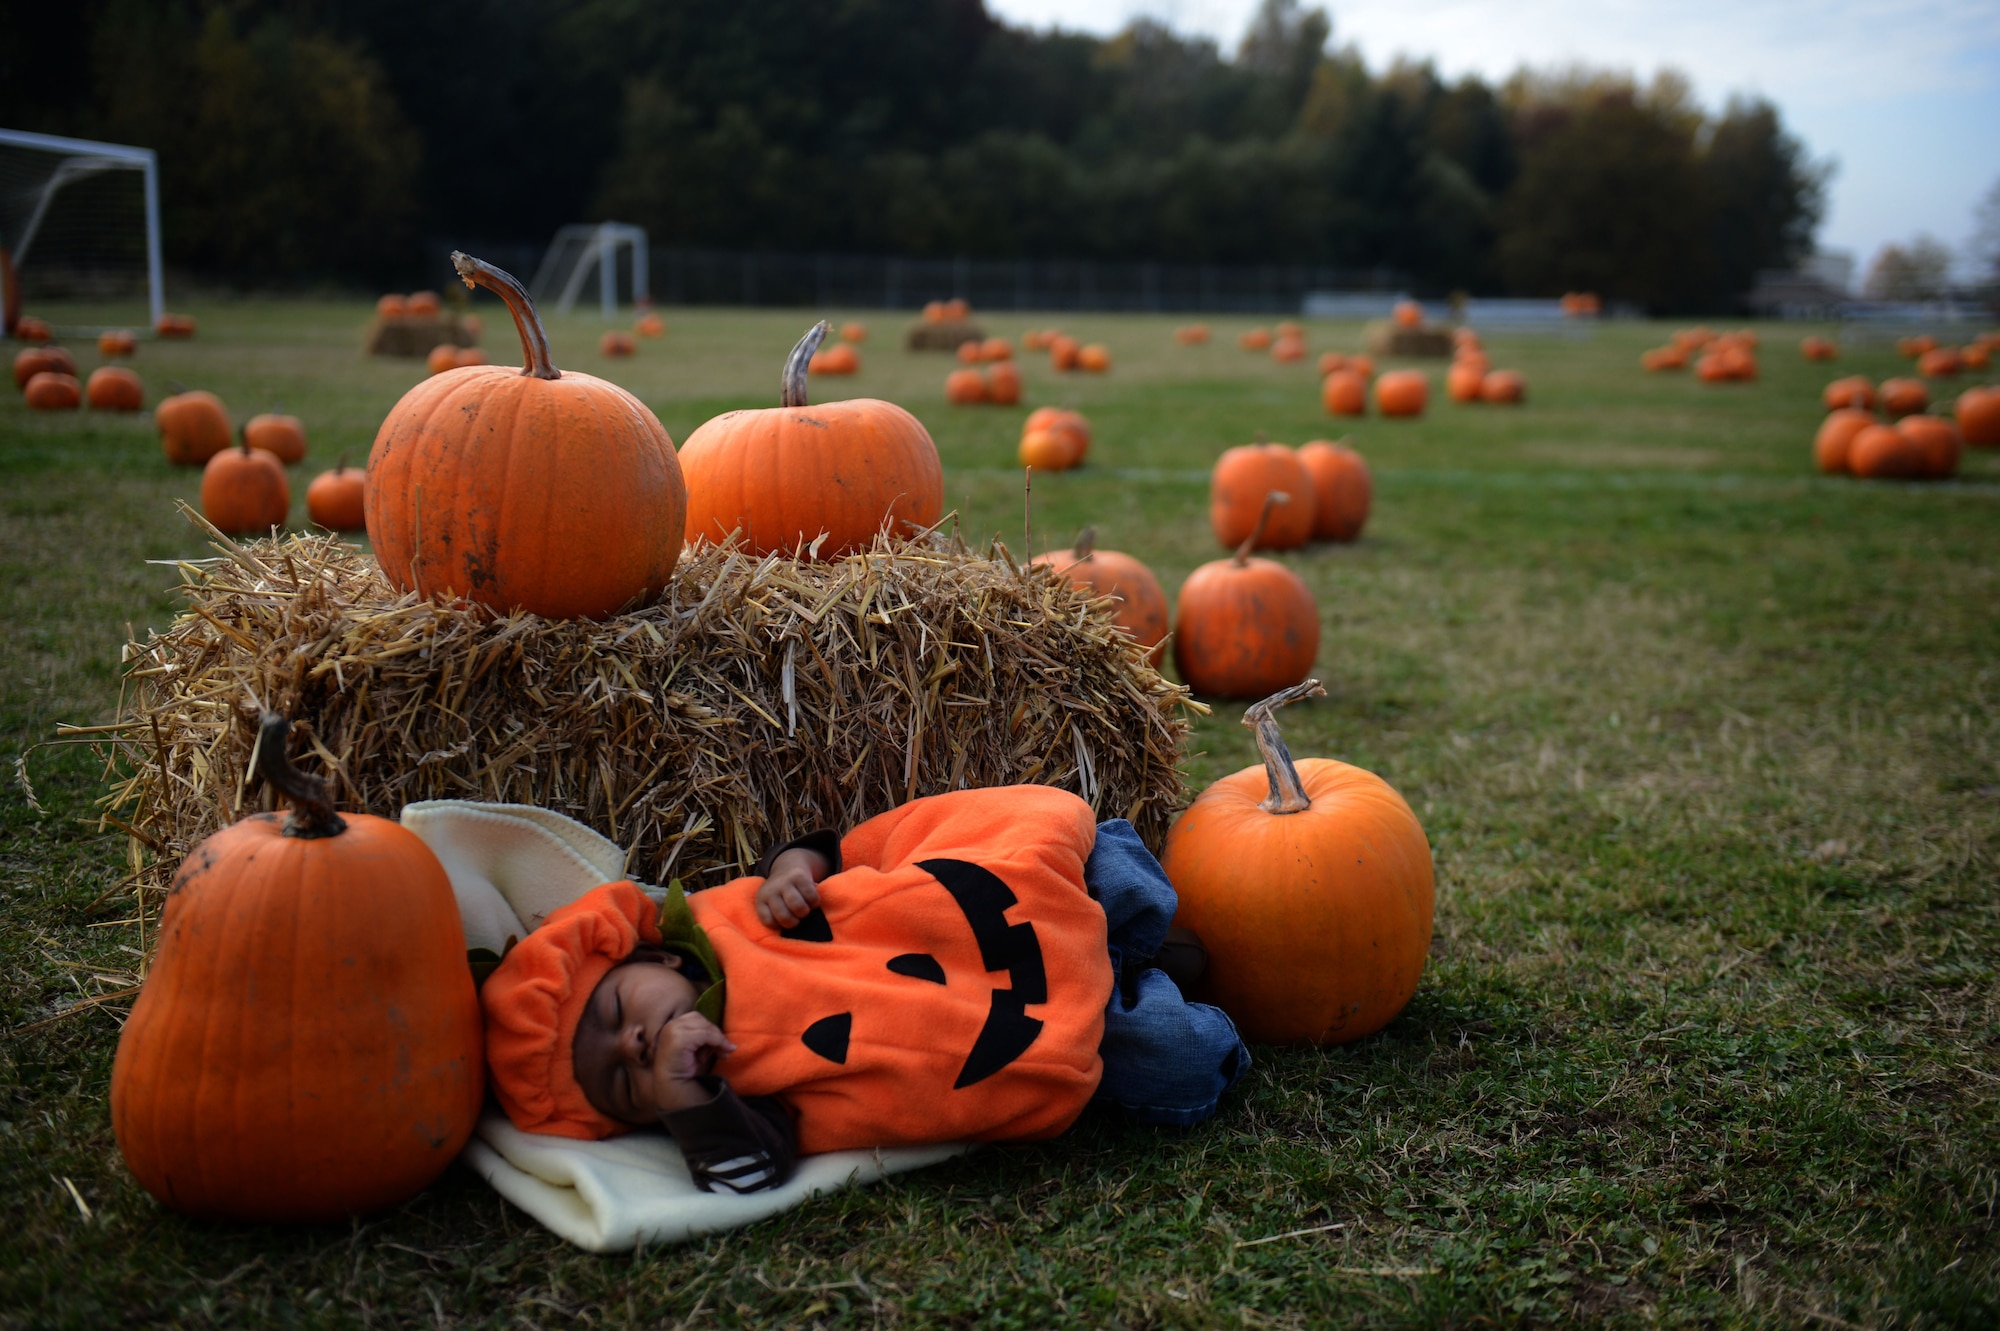 SPANGDAHLEM AIR BASE, Germany – Jonathan Barker, son of Staff Sgt. Mychel and Senior Airman Jasmine Barker, takes a nap in a field of pumpkins near the child development center during a pumpkin patch event Oct. 25, 2012.  The 52nd Force Support Squadron Airman and Family Services Flight sponsor this event to give back to 52nd Fighter Wing families in preparation for the holidays. (U.S. Air Force photo by Airman 1st Class Gustavo Castillo/Released)